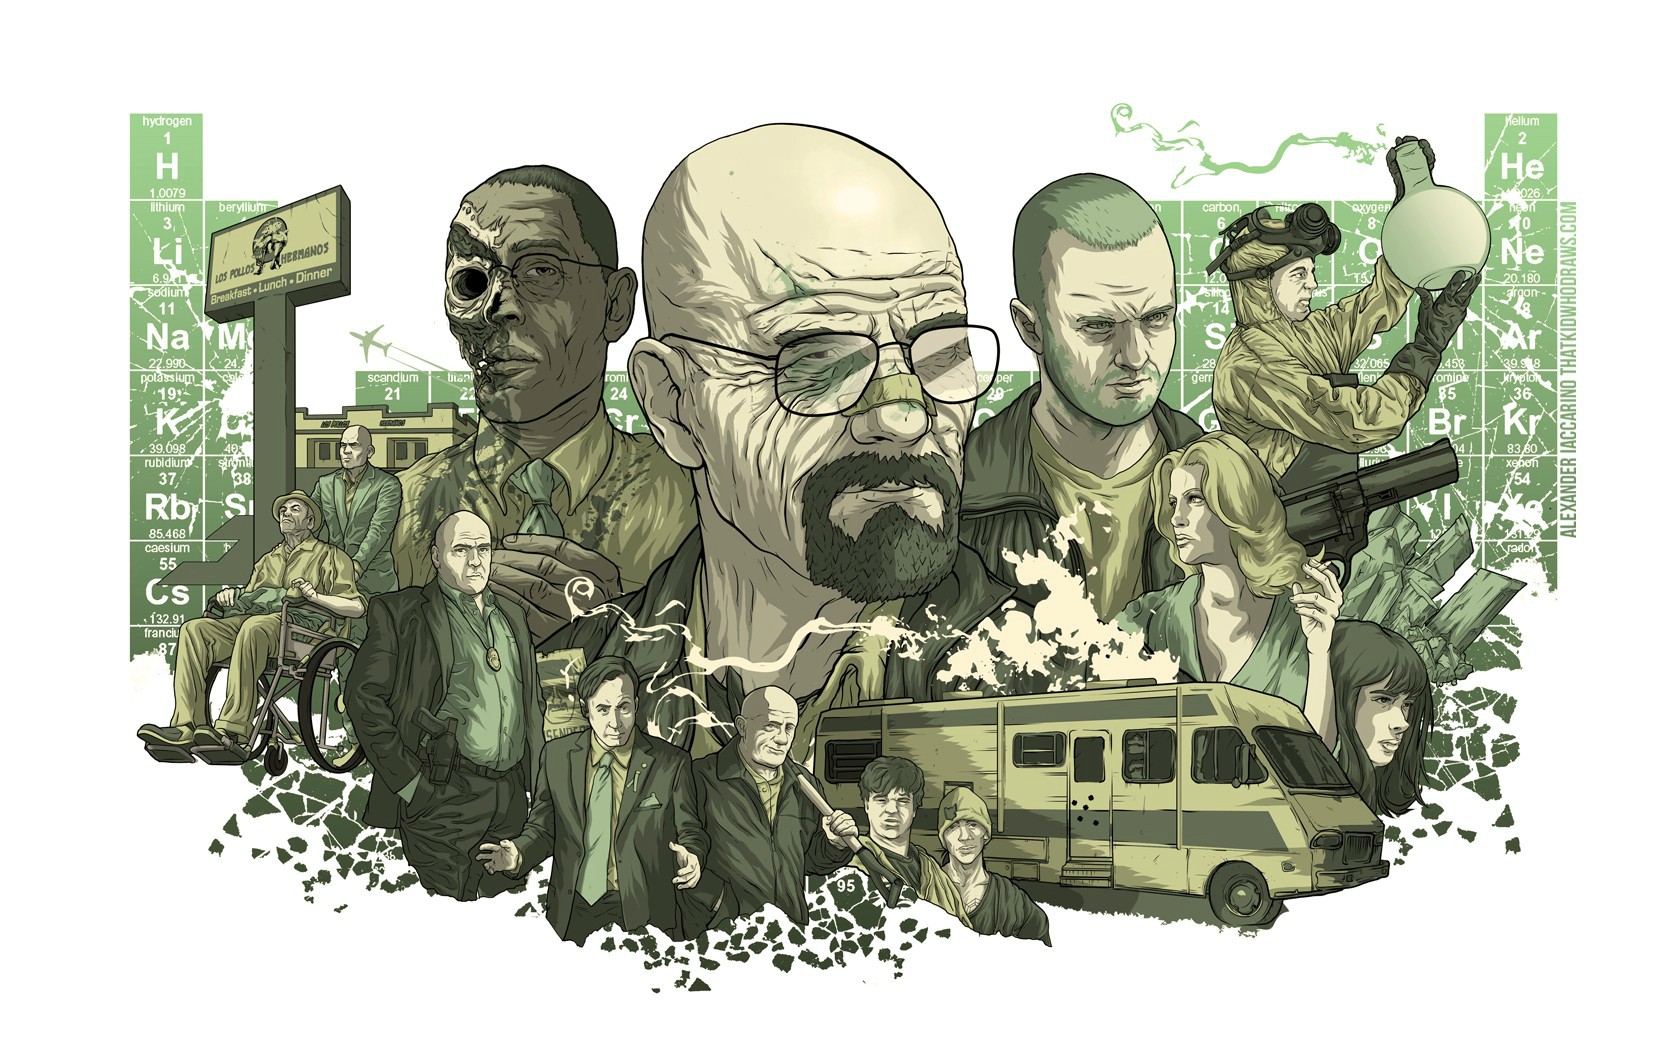 Breaking Bad pictures and gifs